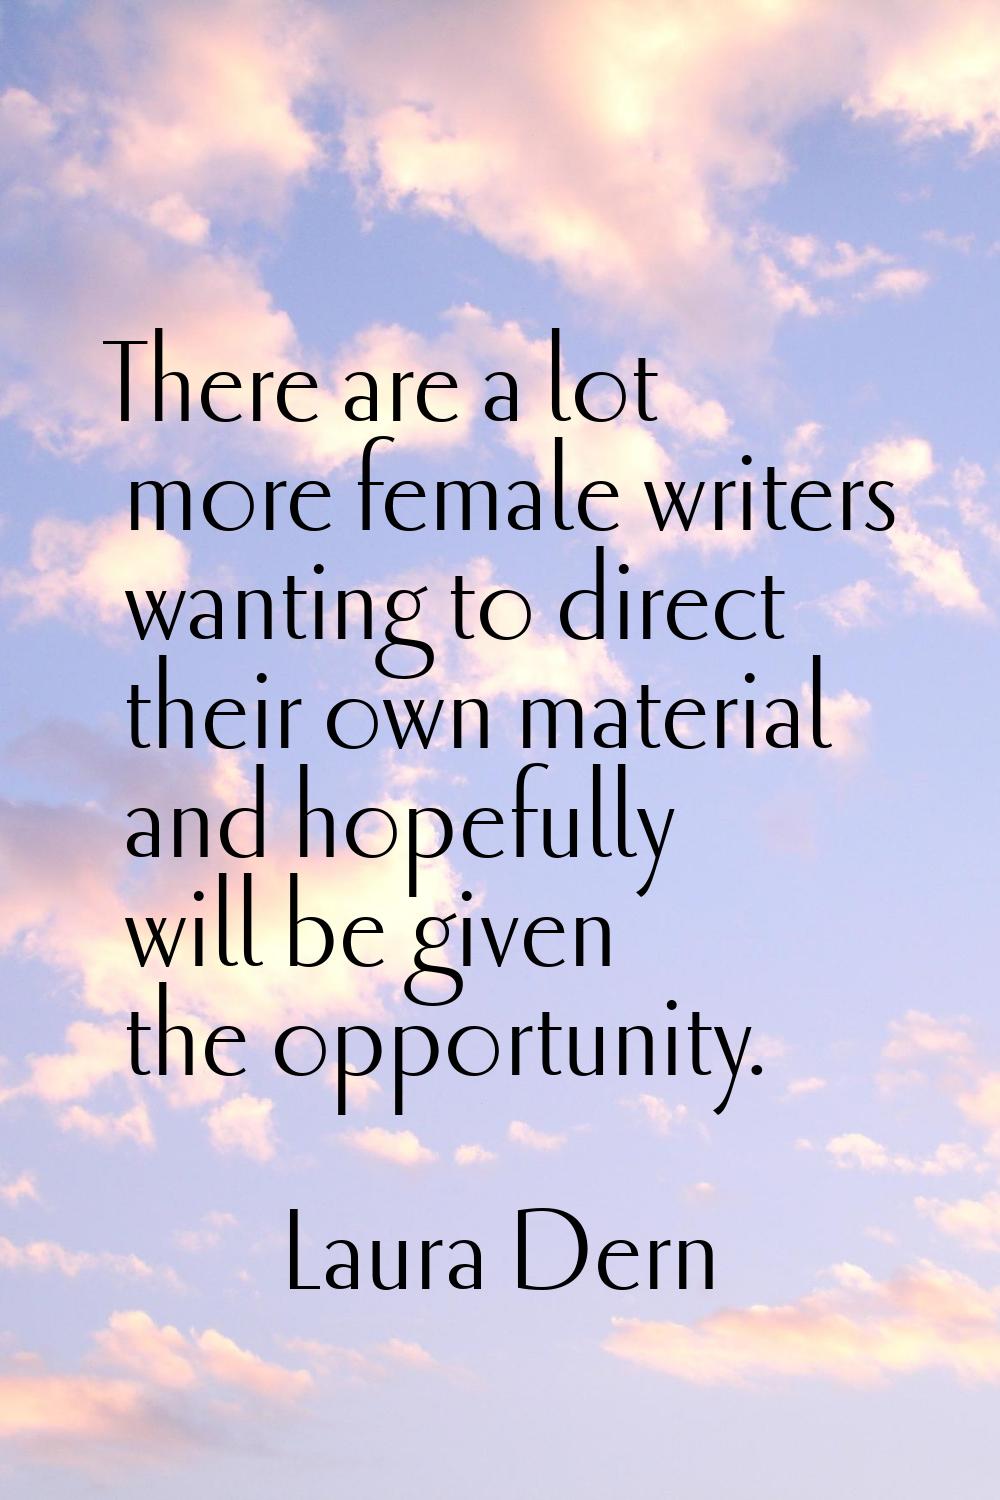 There are a lot more female writers wanting to direct their own material and hopefully will be give